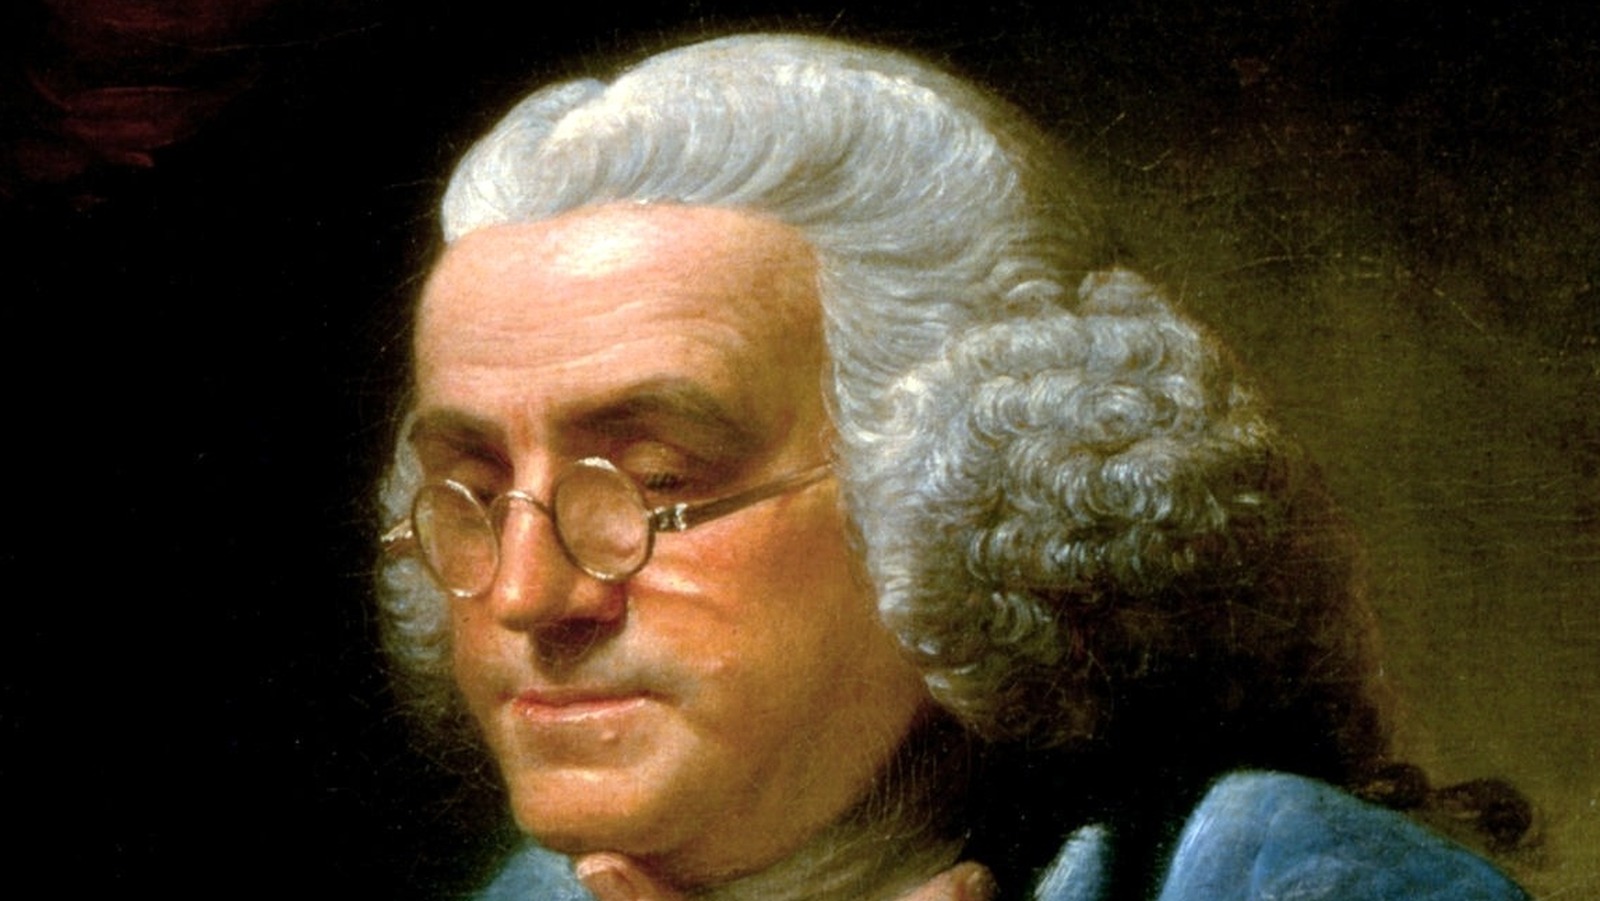 A Complete List of Benjamin Franklin's Inventions